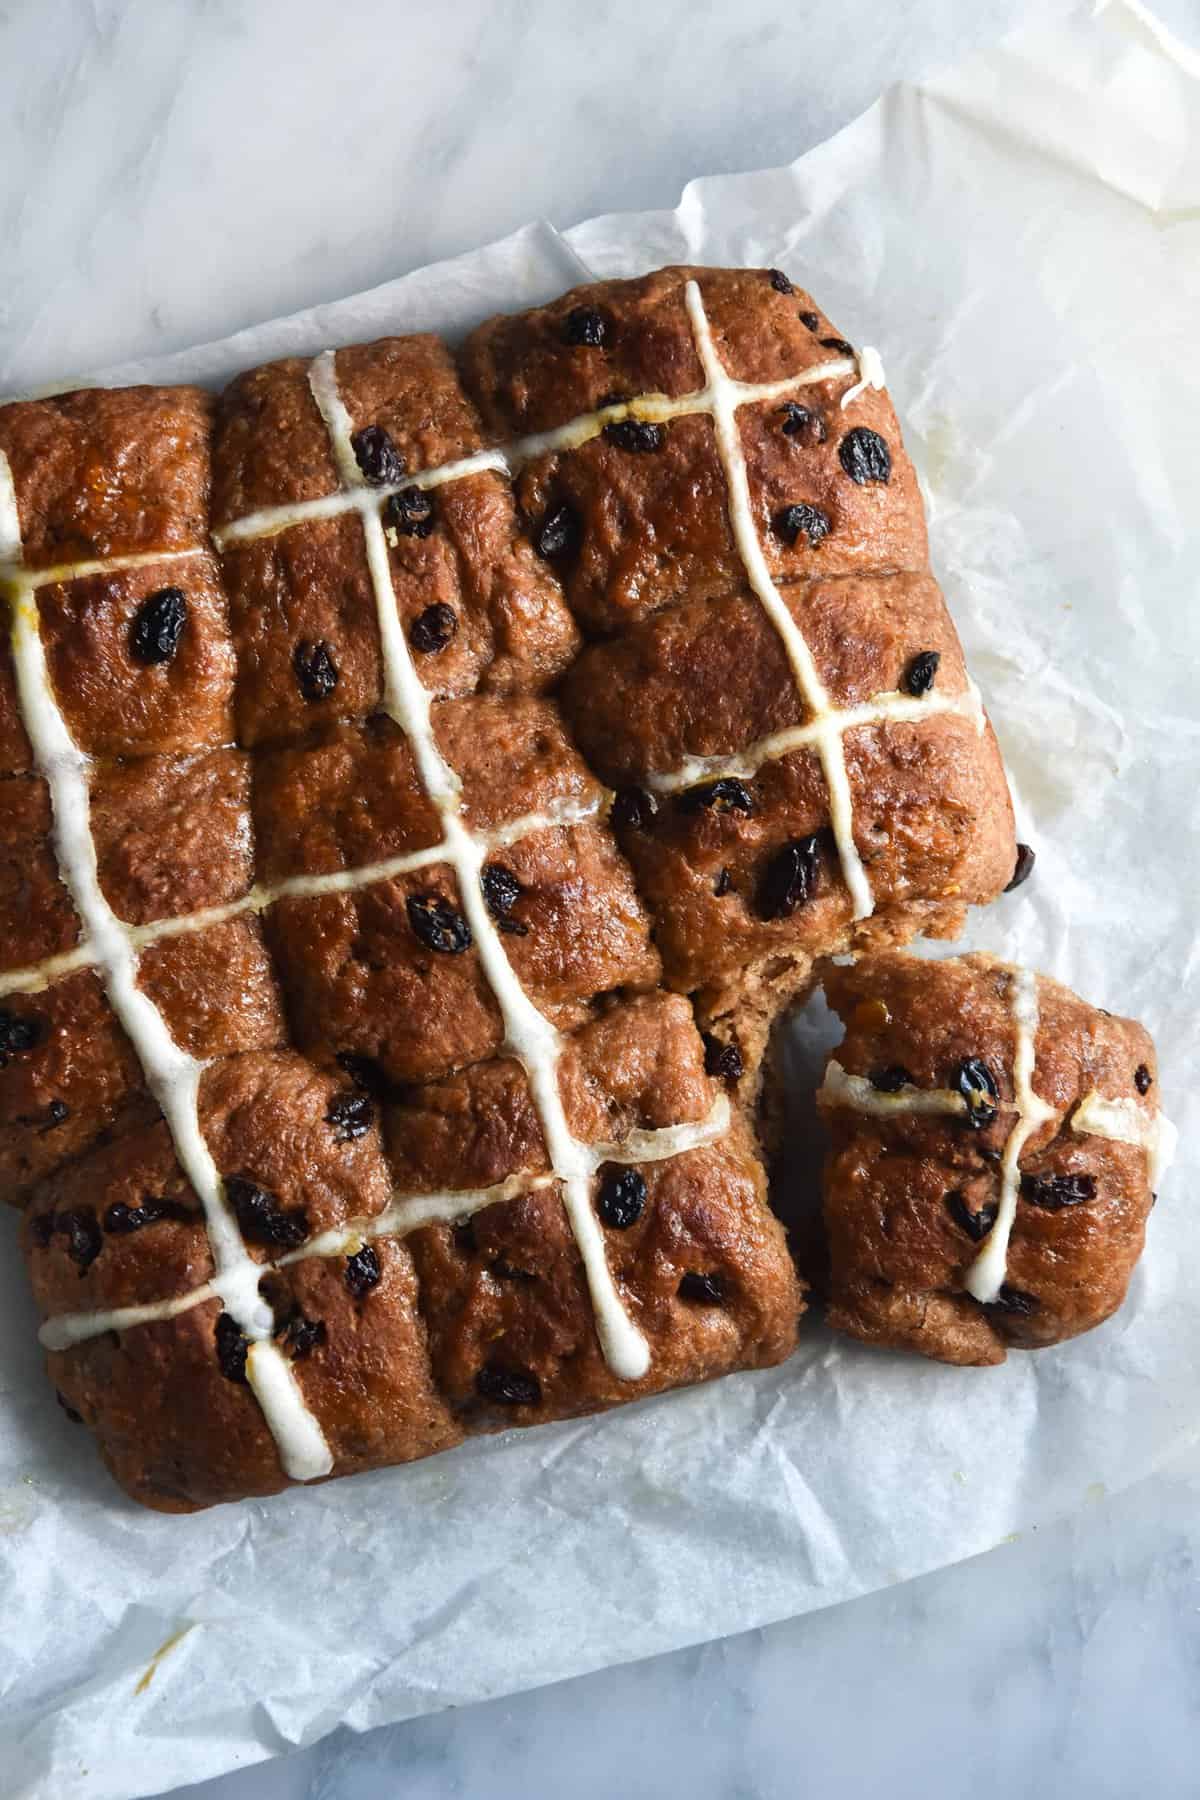 An aerial view of a sheet of gluten free, FODMAP friendly hot cross buns. The buns sit atop a white marble table on a crinkled sheet of baking paper